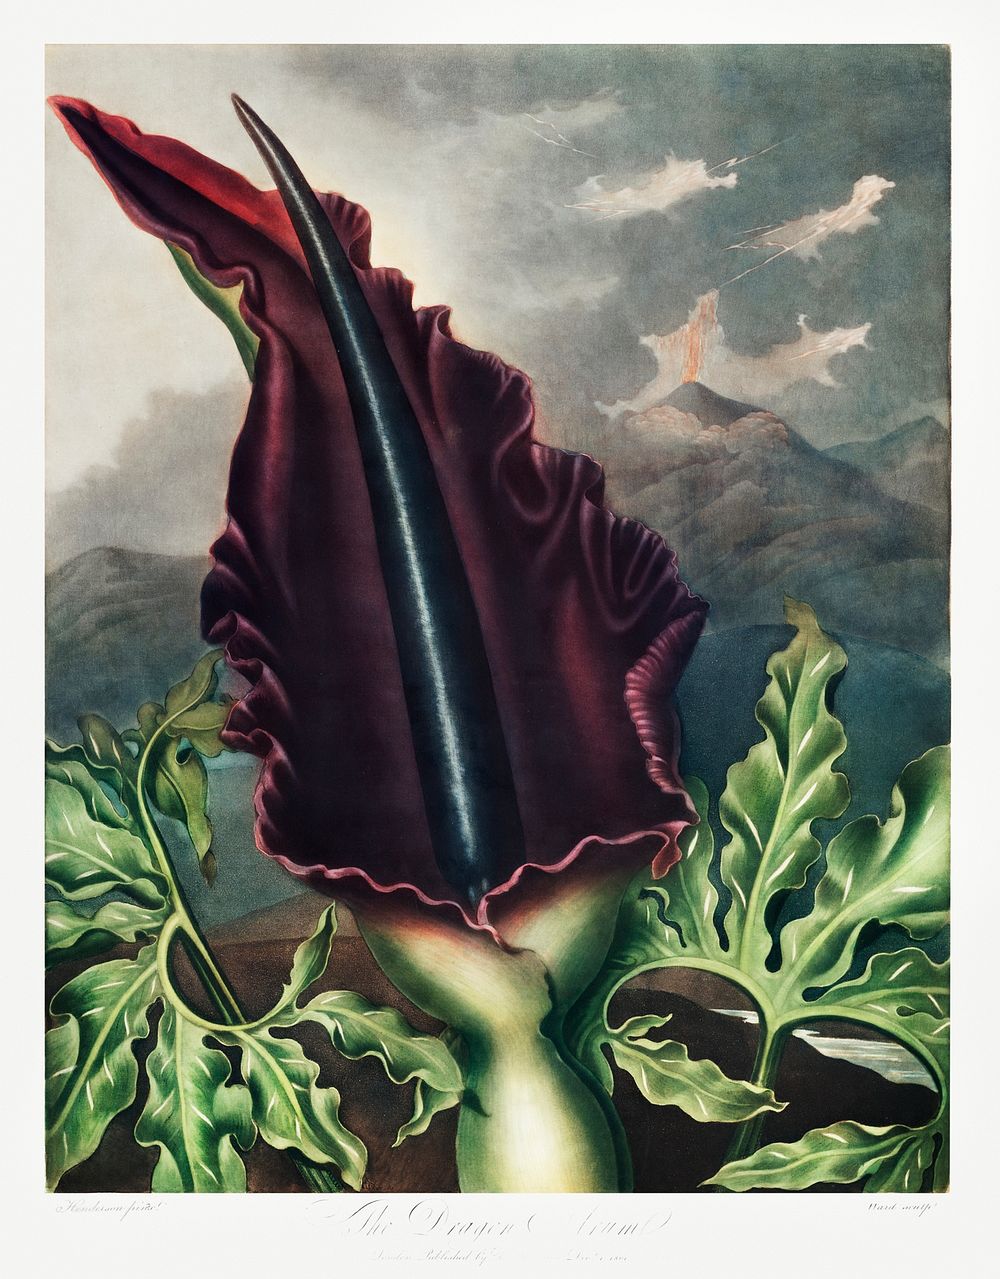 The Dragon Arum from The Temple of Flora (1807) by Robert John Thornton. Original from Biodiversity Heritage Library.…